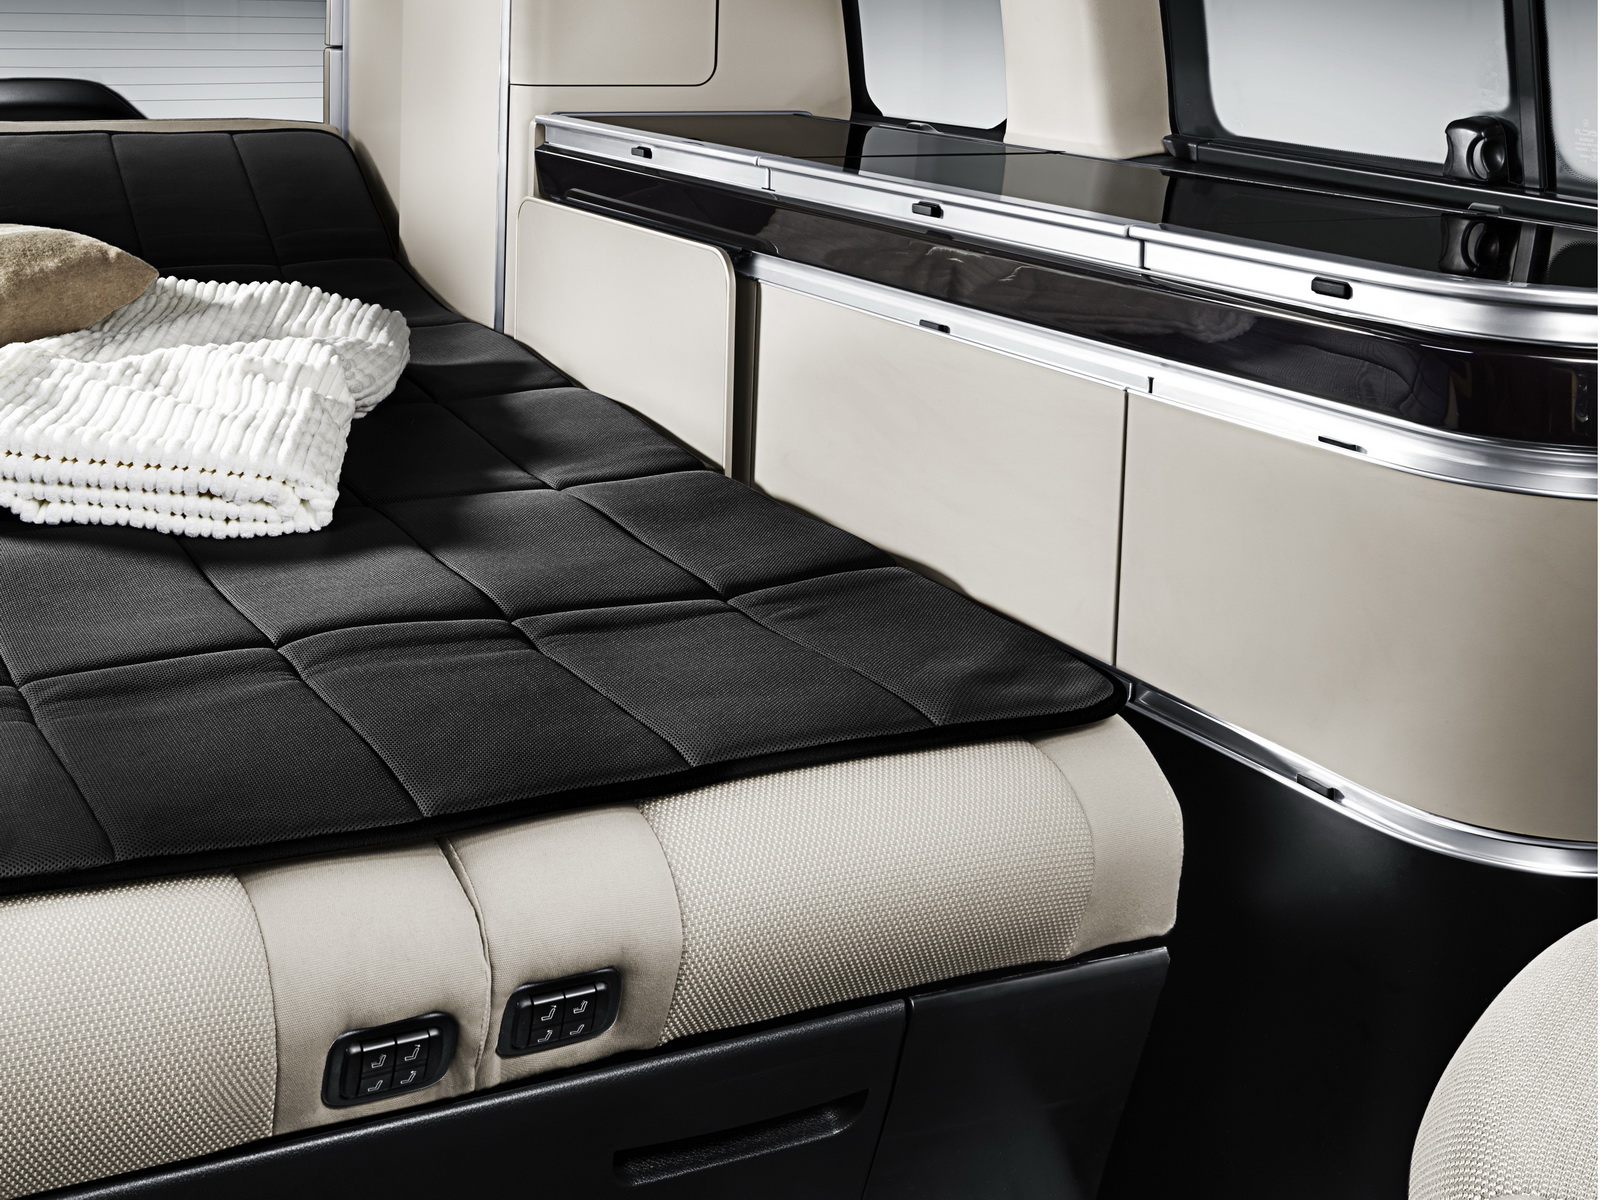 Mercedes-Benz Marco Polo Sonderzubehör – Schlafauflage Bett unten ;Mercedes-Benz Marco Polo special accessory items – mattress cover for the lower bed;